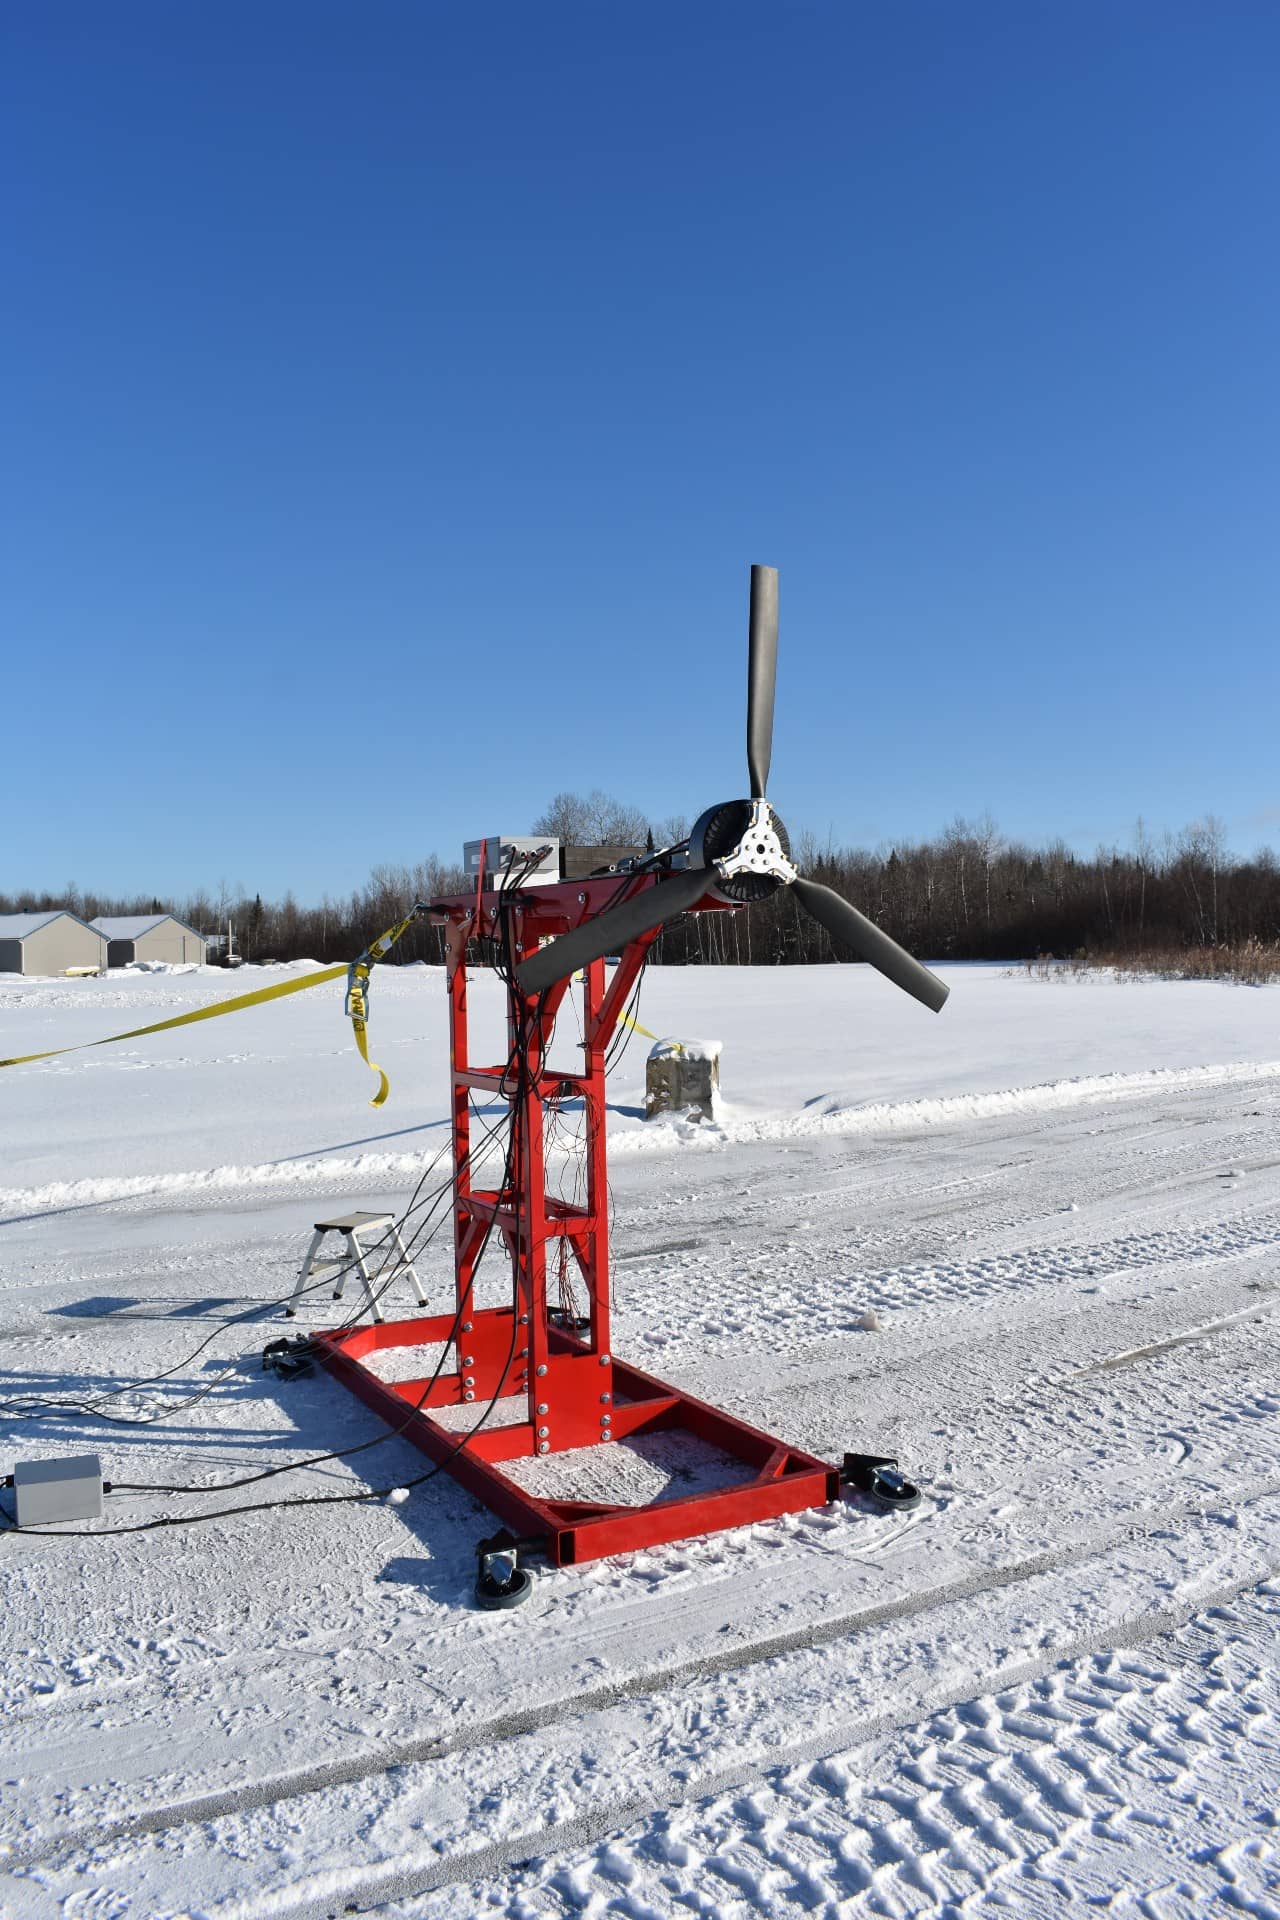 A mount holding a propeller during winter